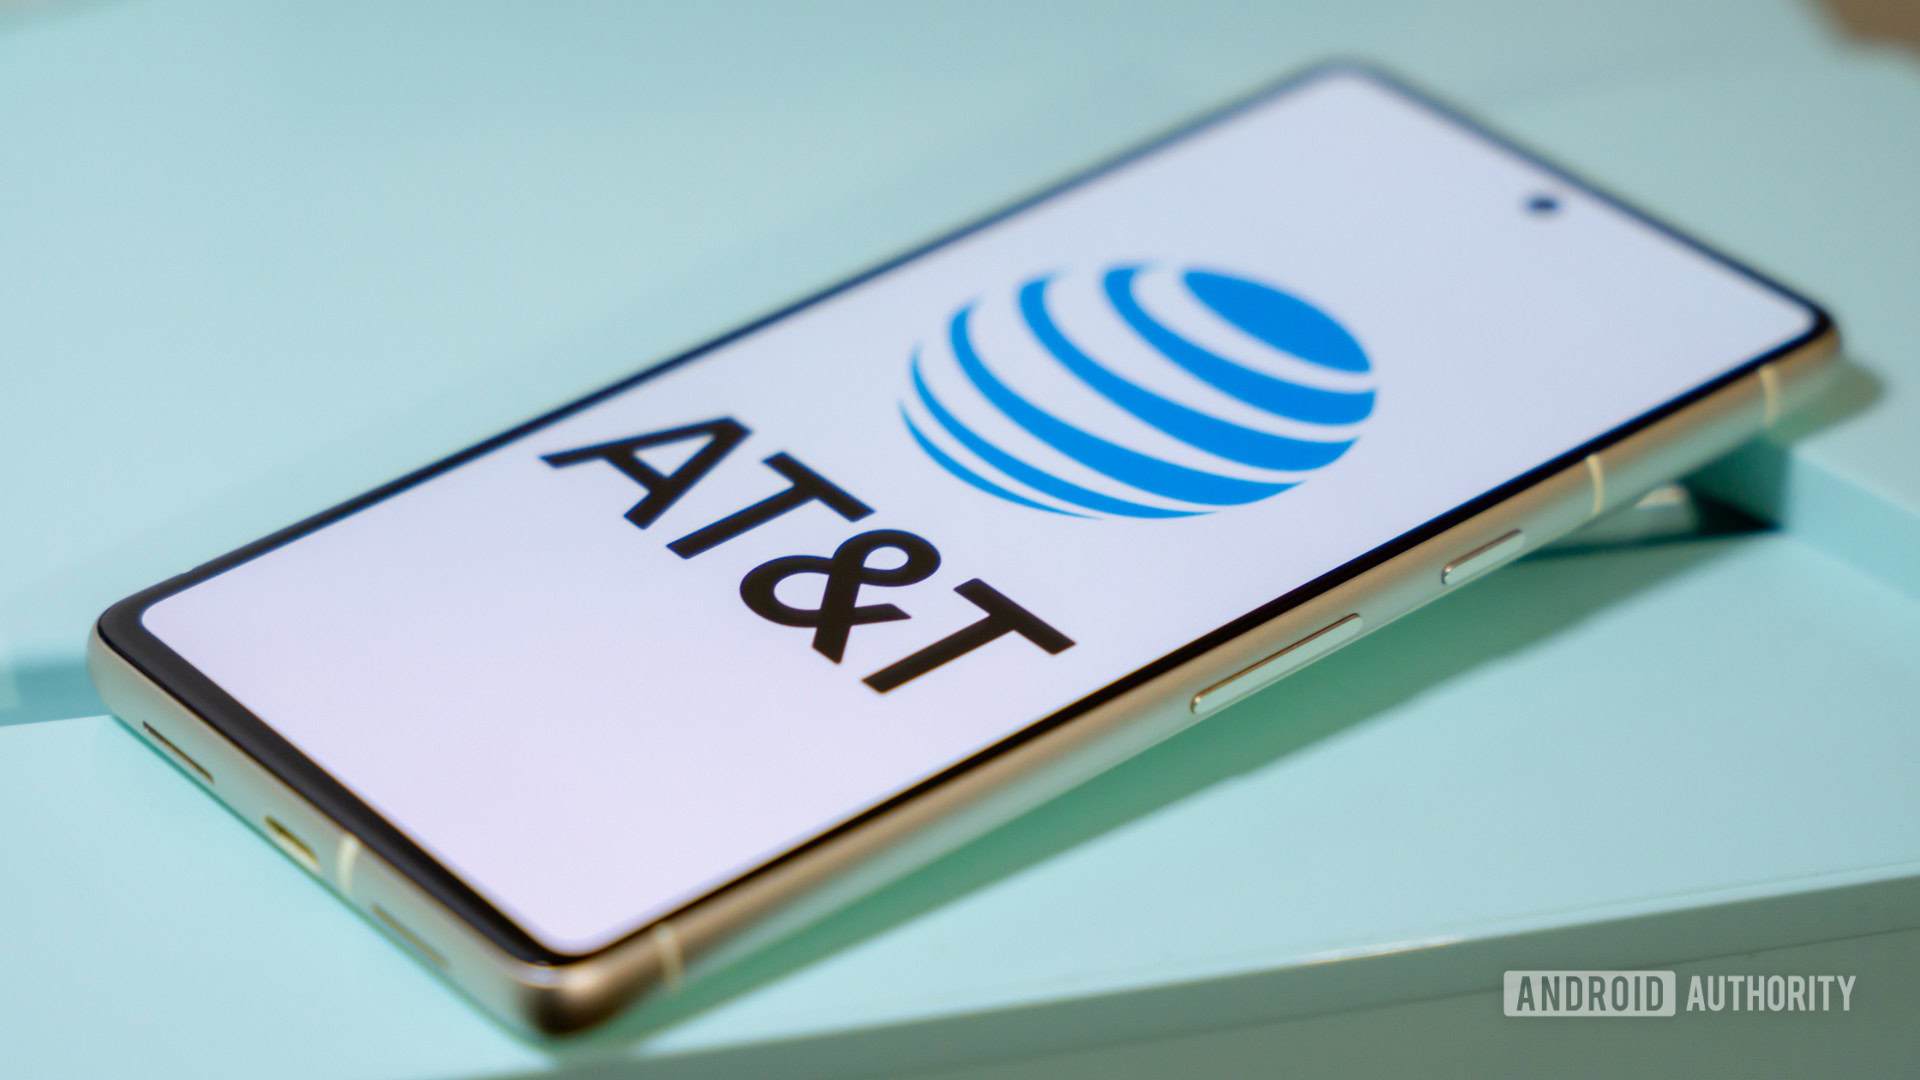 AT&amp;T logo on smartphone (2)